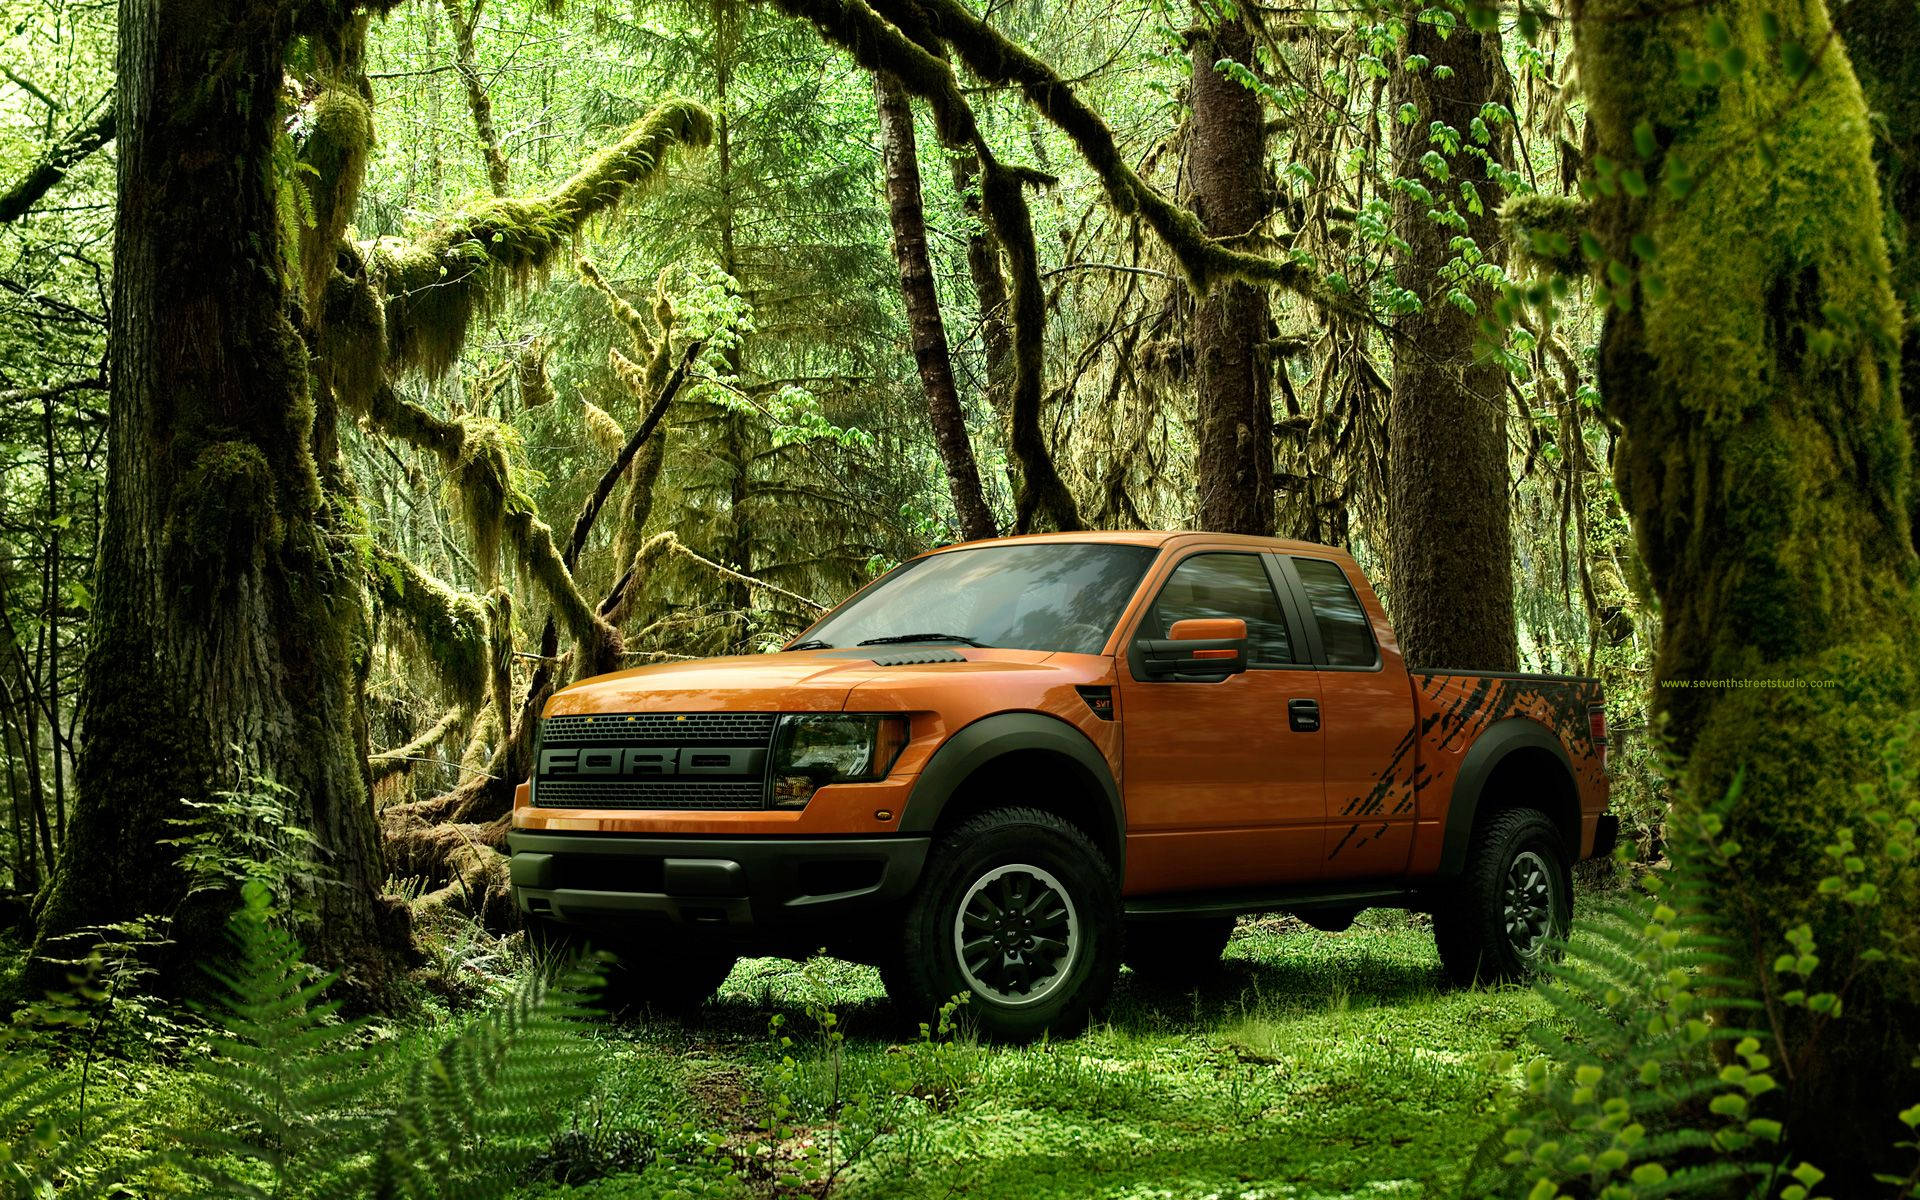 Ford Raptor In Mossy Jungle Background